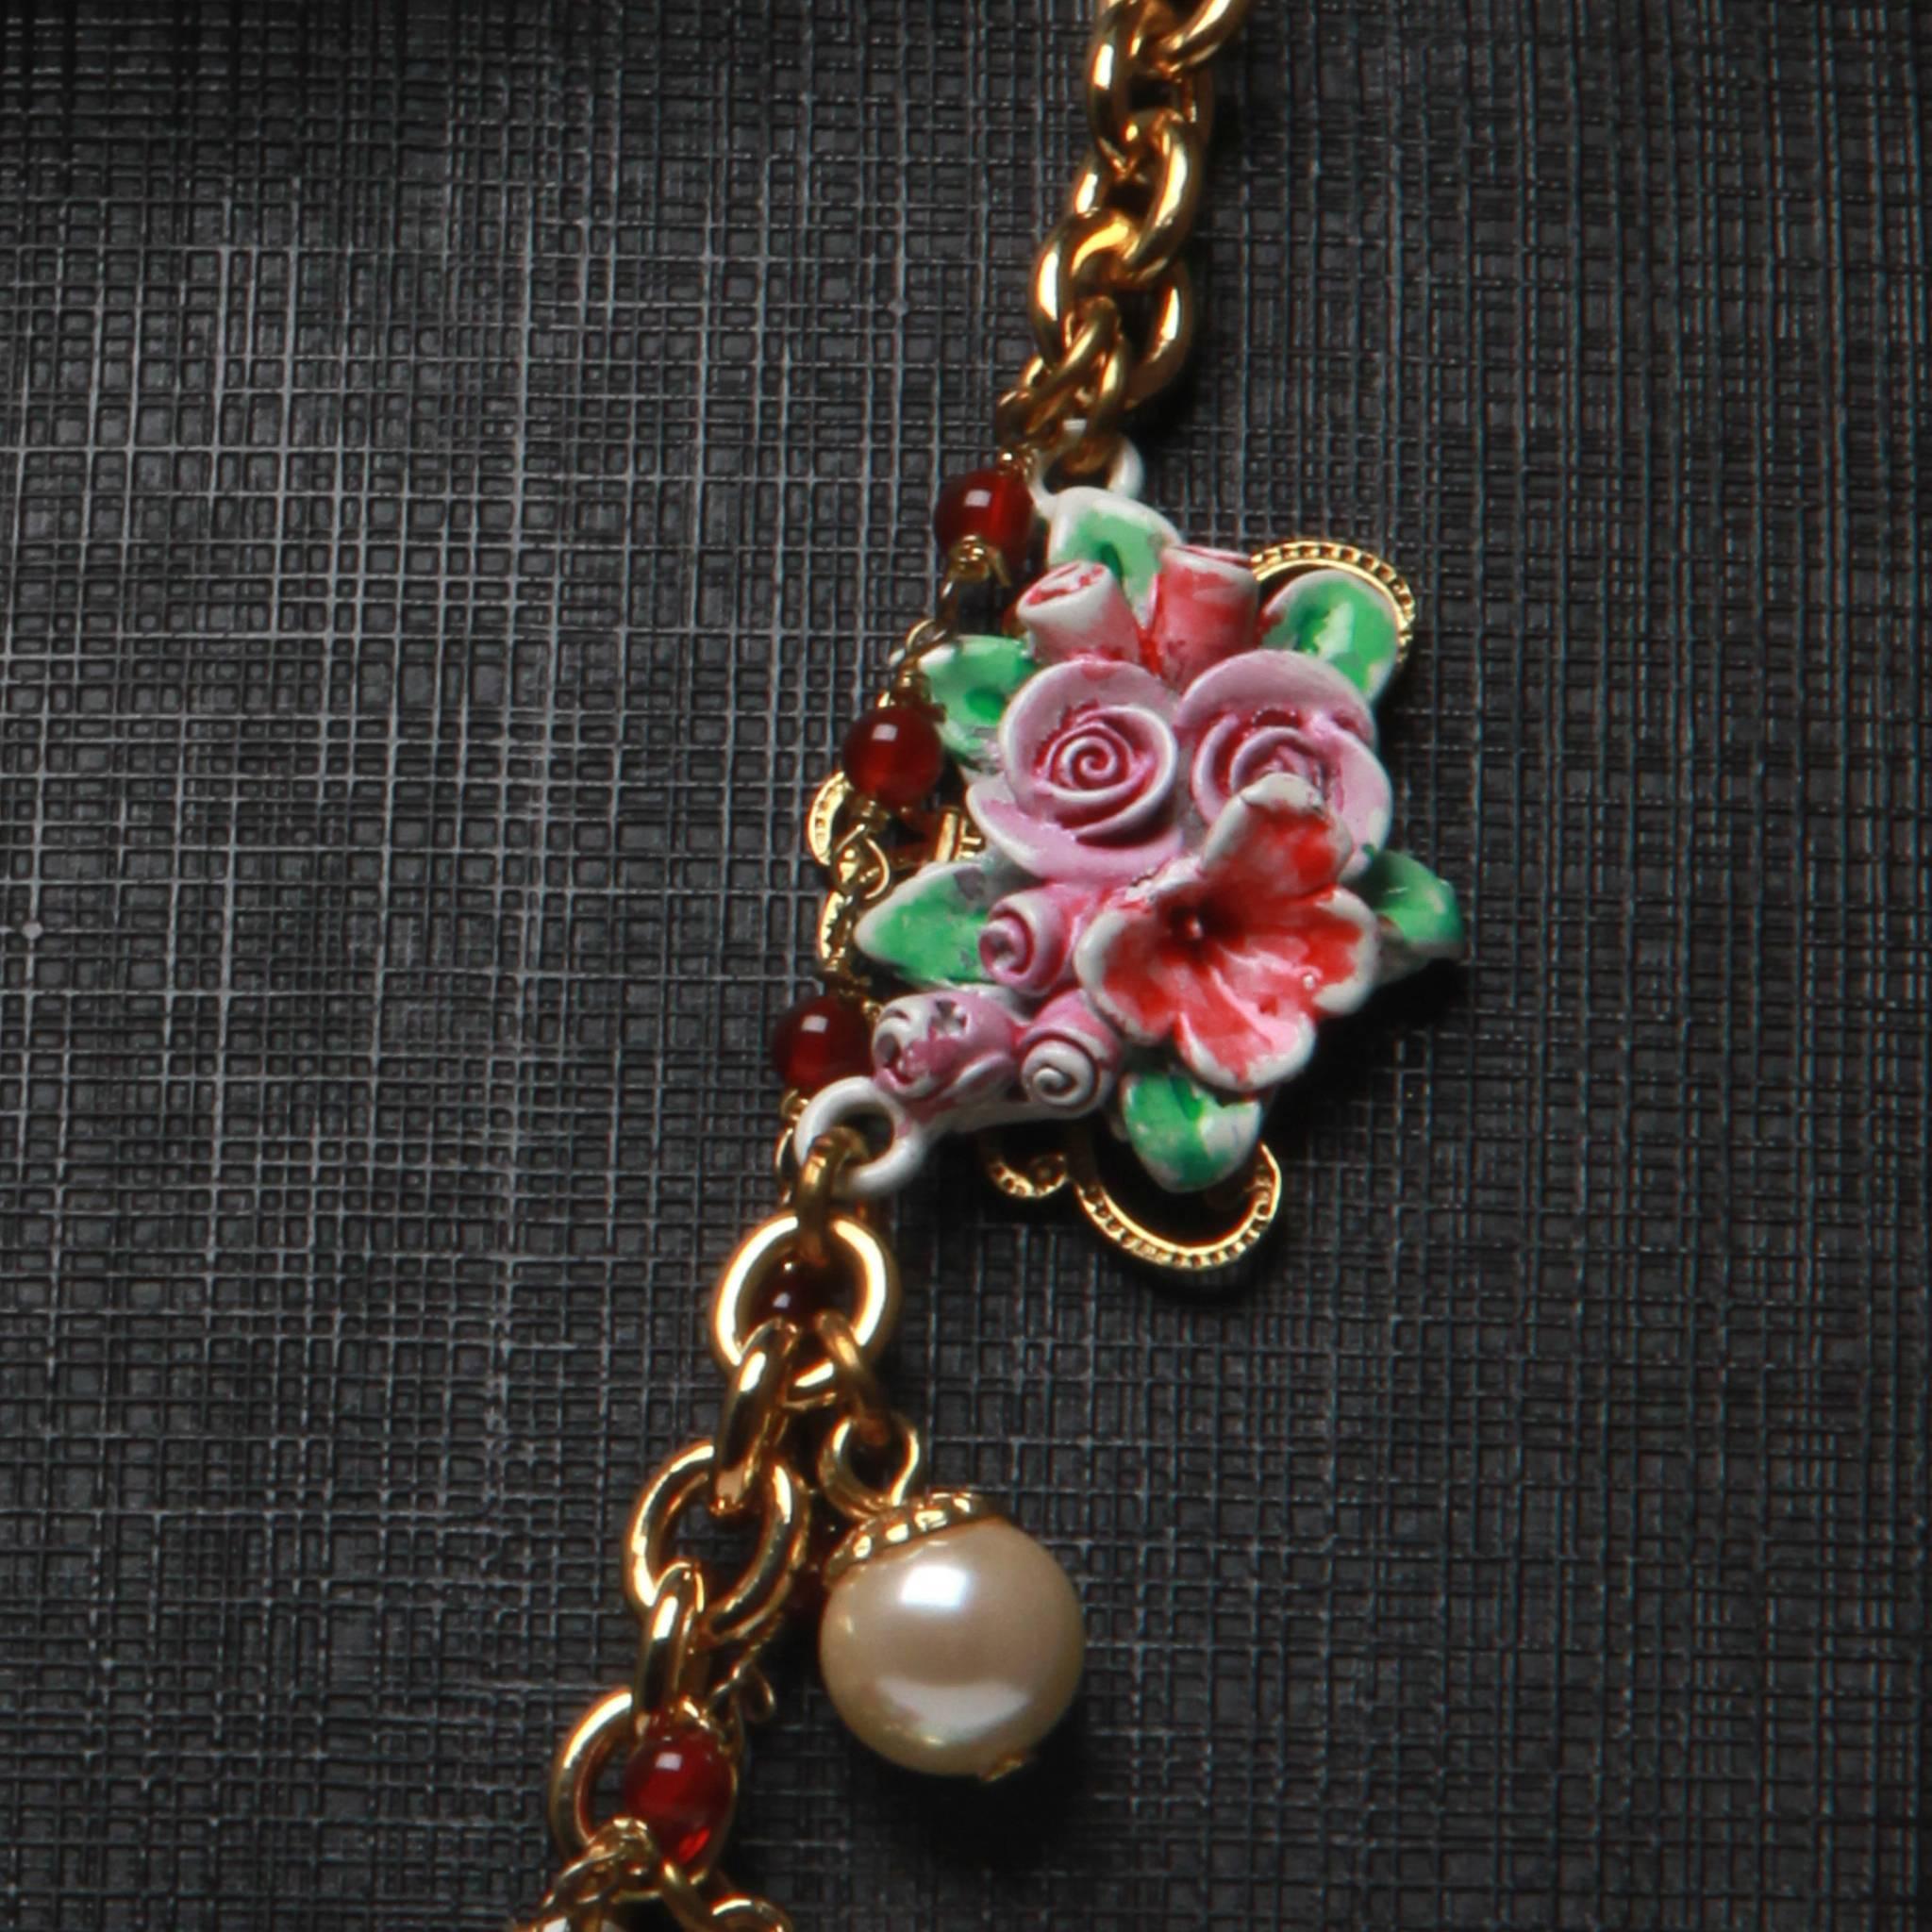 Dolce & Gabbana Sicily inspired Floral Charm Necklace NWT and Box In Excellent Condition For Sale In Melbourne, Victoria